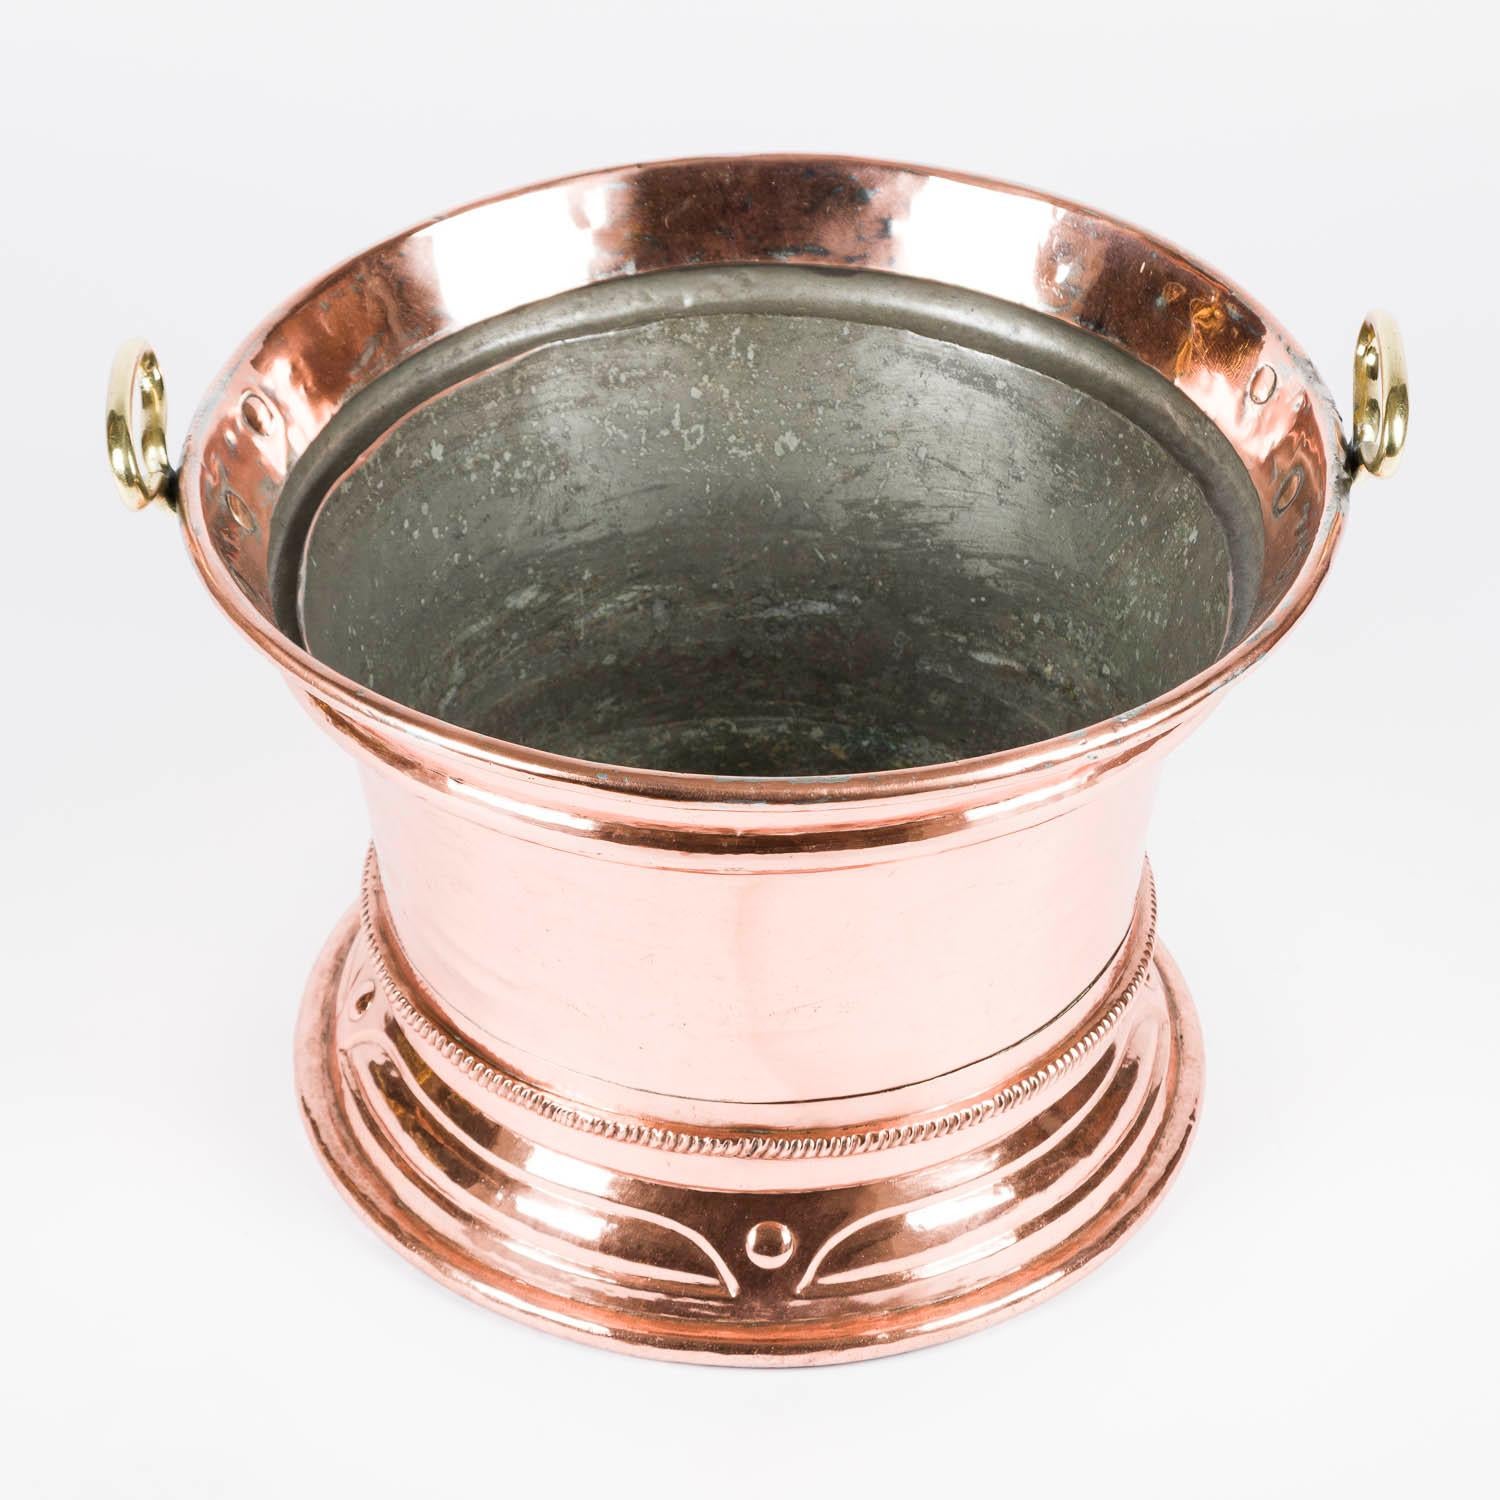 A copper planter with Art Nouveau decoration and brass handles, circa 1900.

With tinned interior.